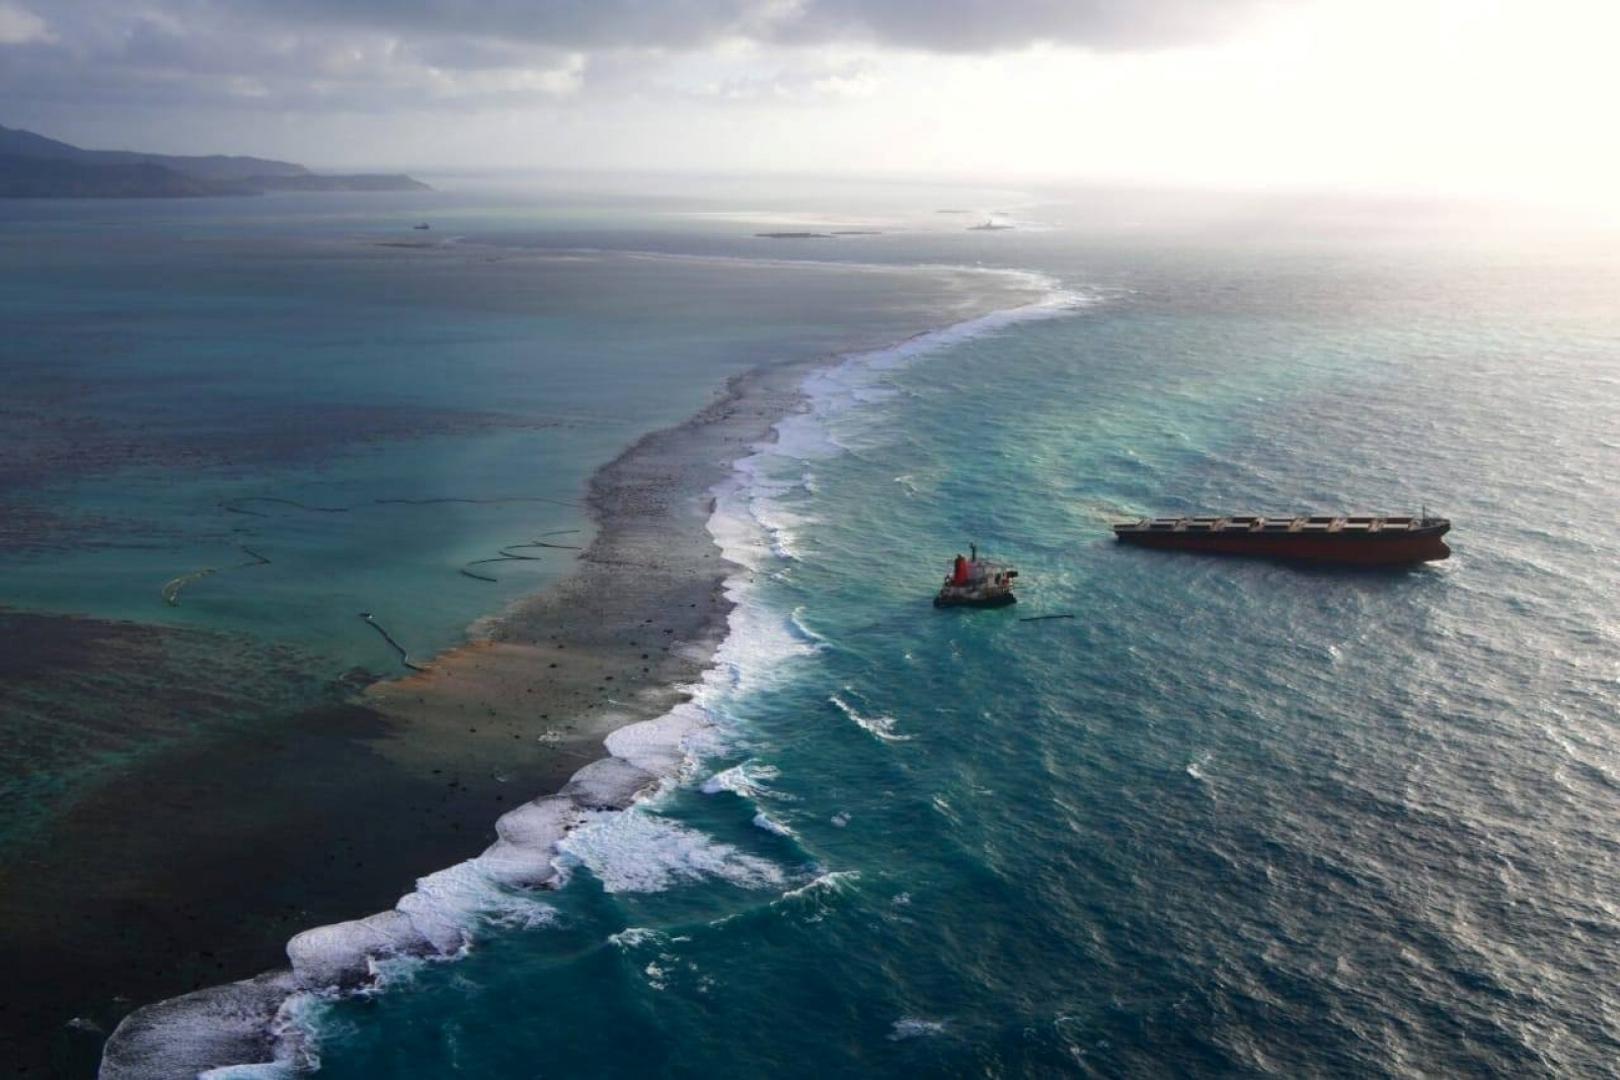 A Japanese bulk carrier MV Wakashio, that has struck a coral reef causing an oil spill, is seen in Mauritius A Japanese bulk carrier MV Wakashio, that has struck a coral reef causing an oil spill, is seen in Mauritius, in this undated aerial picture obtained from social media on August 18, 2020. Mobilisation Nationale Wakashio/via REUTERS  THIS IMAGE HAS BEEN SUPPLIED BY A THIRD PARTY. MANDATORY CREDIT. NO RESALES. NO ARCHIVES. MOBILISATION NATIONALE WAKASHIO